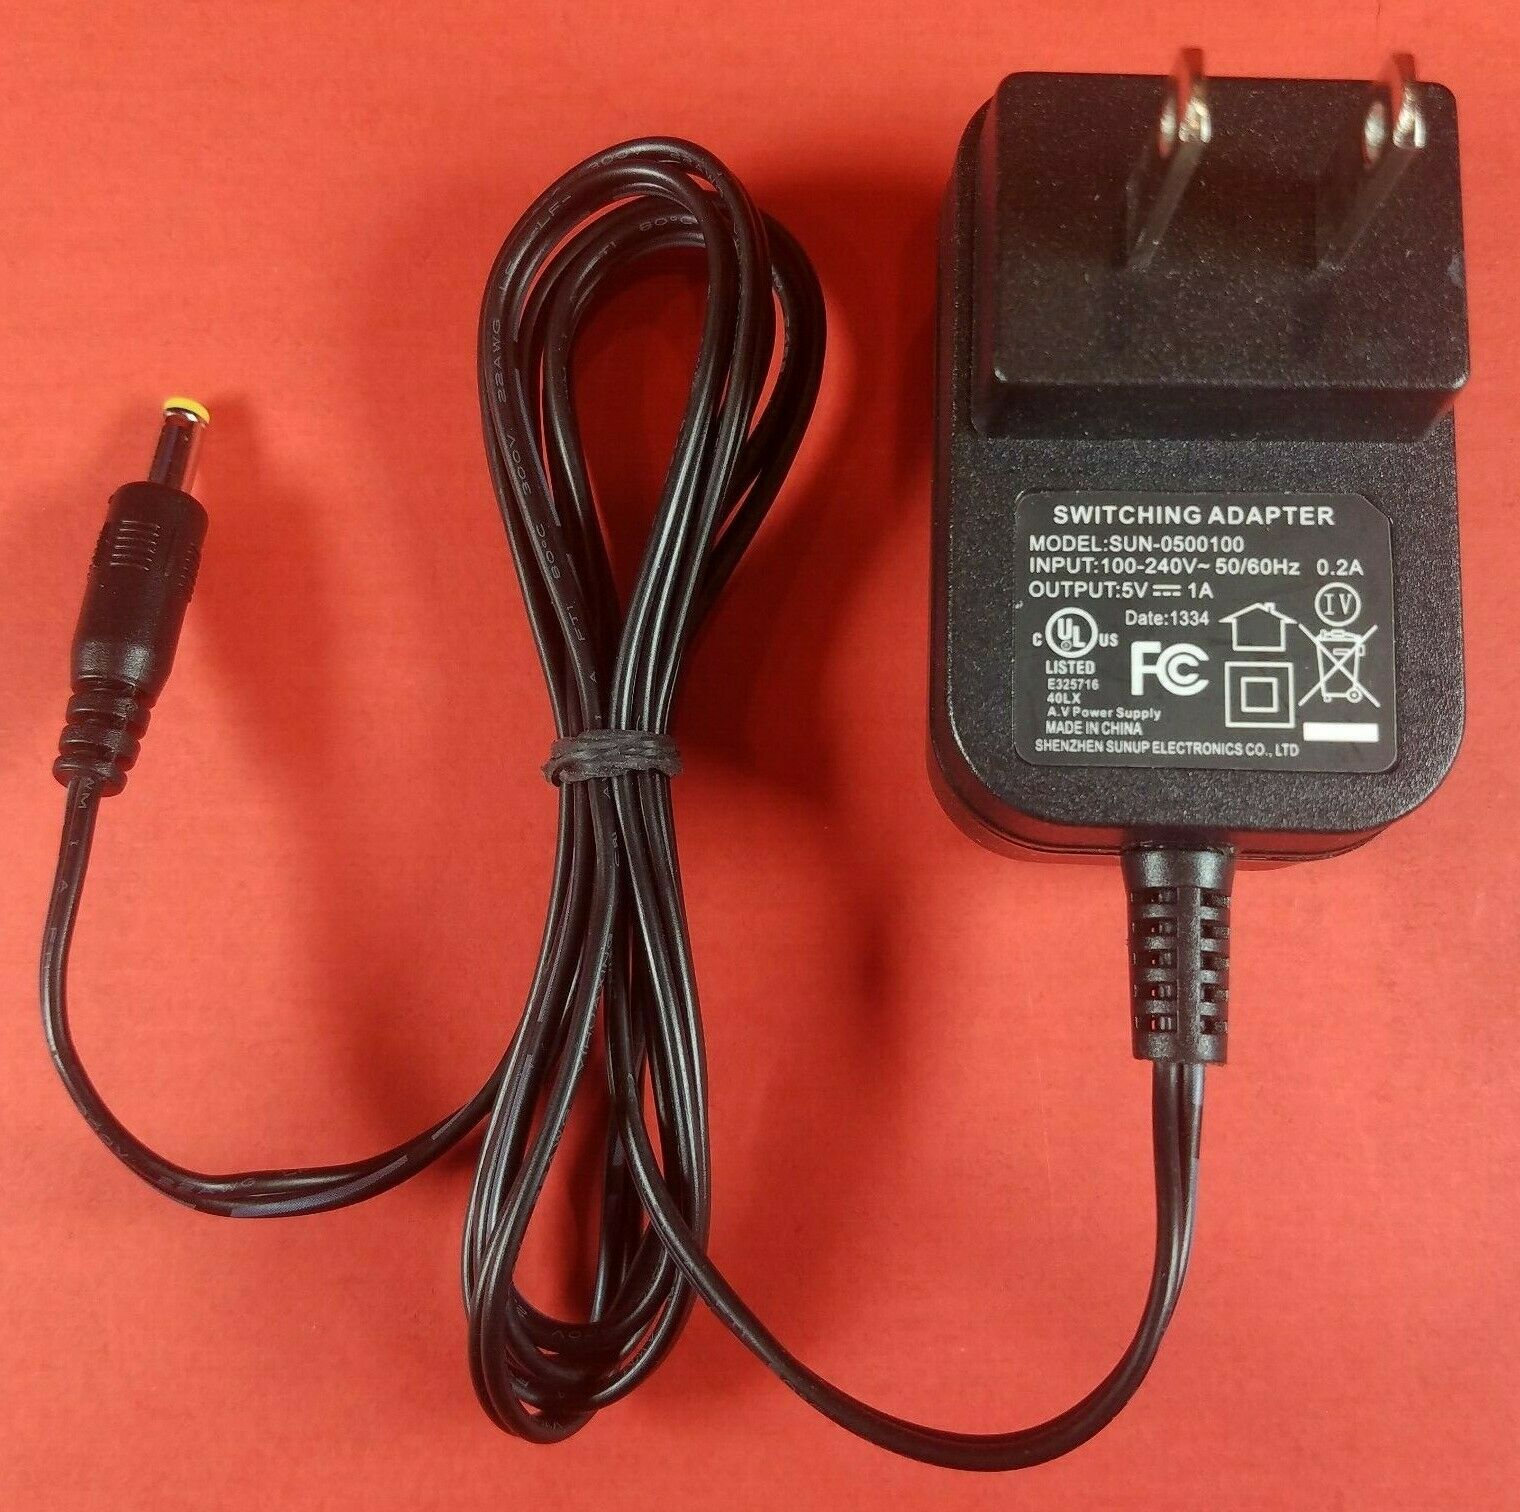 Shenzhen Sunup SUN-0500100 Switching Power Supply Adaptor 5V - 1A AC/DC Adapter Type: Switching Ad